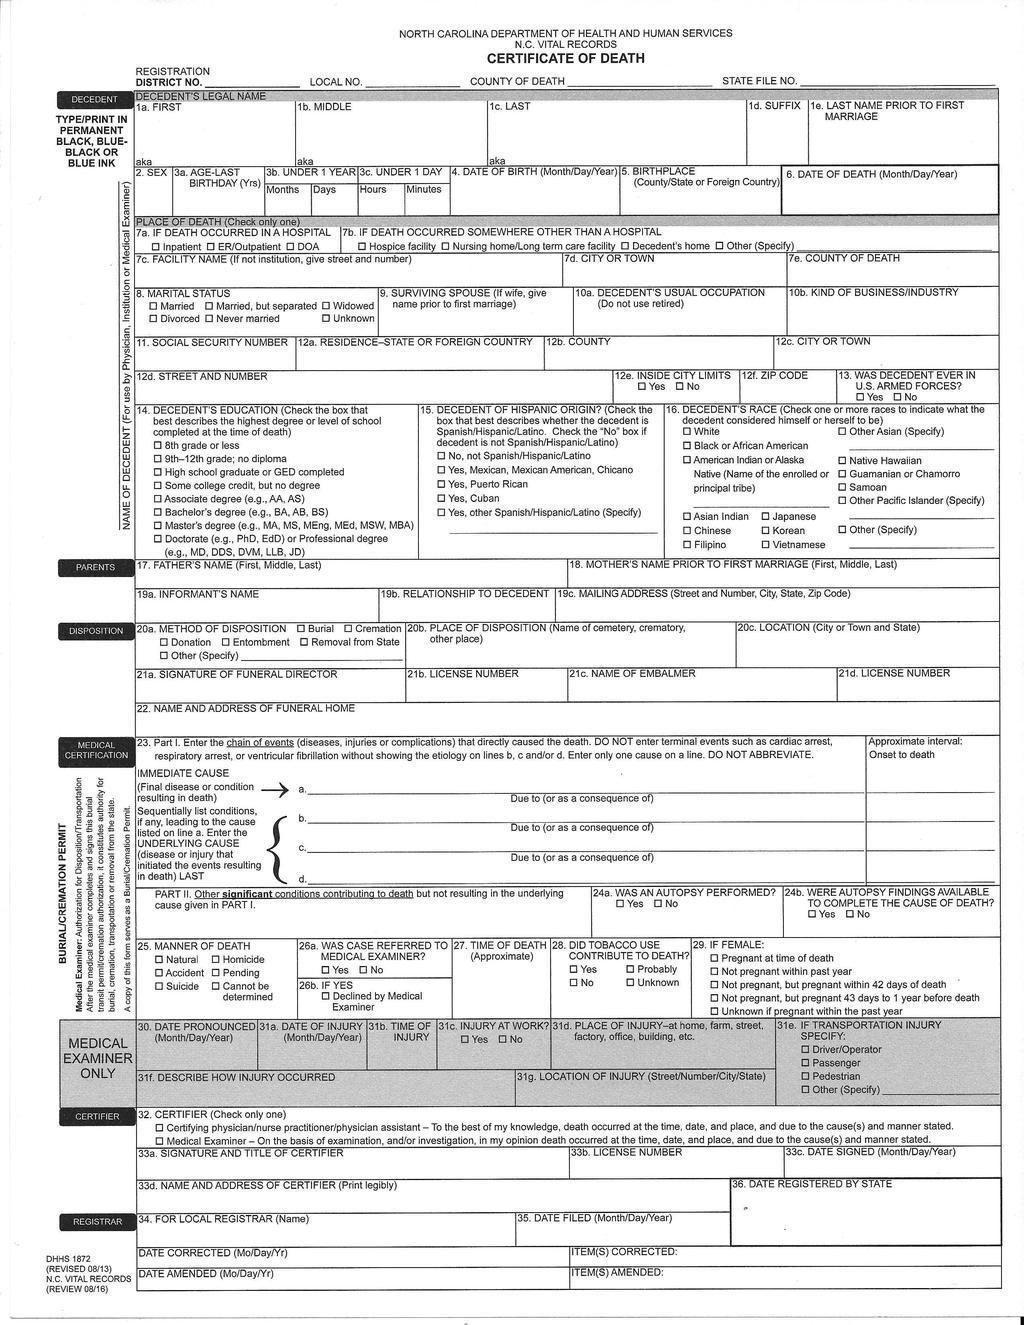 NEW DEATH CERTIFICATE 1/2014 MEDICAL ME CREMATION TRANSPORTATION Now Combined MD/ME ME interaction with County